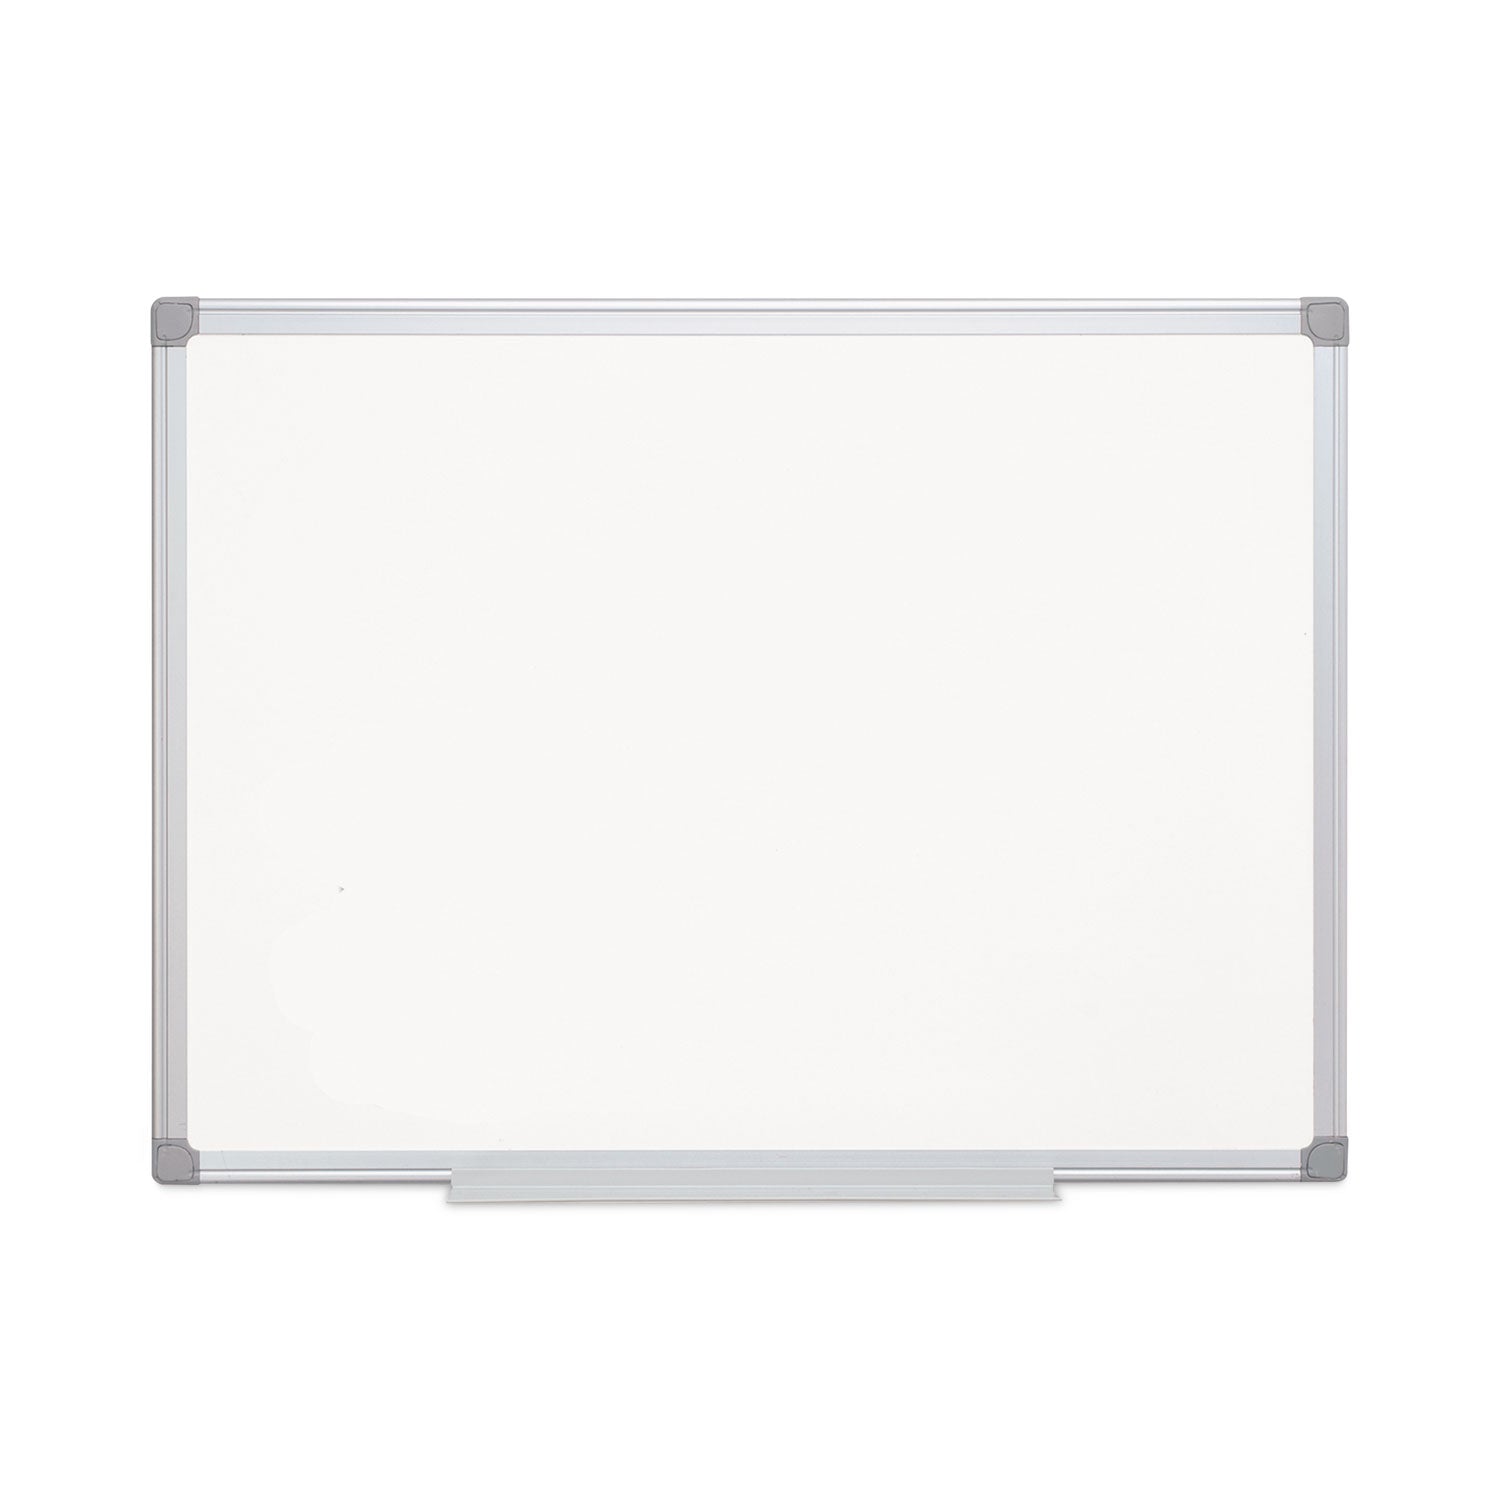 Earth Gold Ultra Magnetic Dry Erase Boards, 48 x 72, White Surface, Silver Aluminum Frame - 